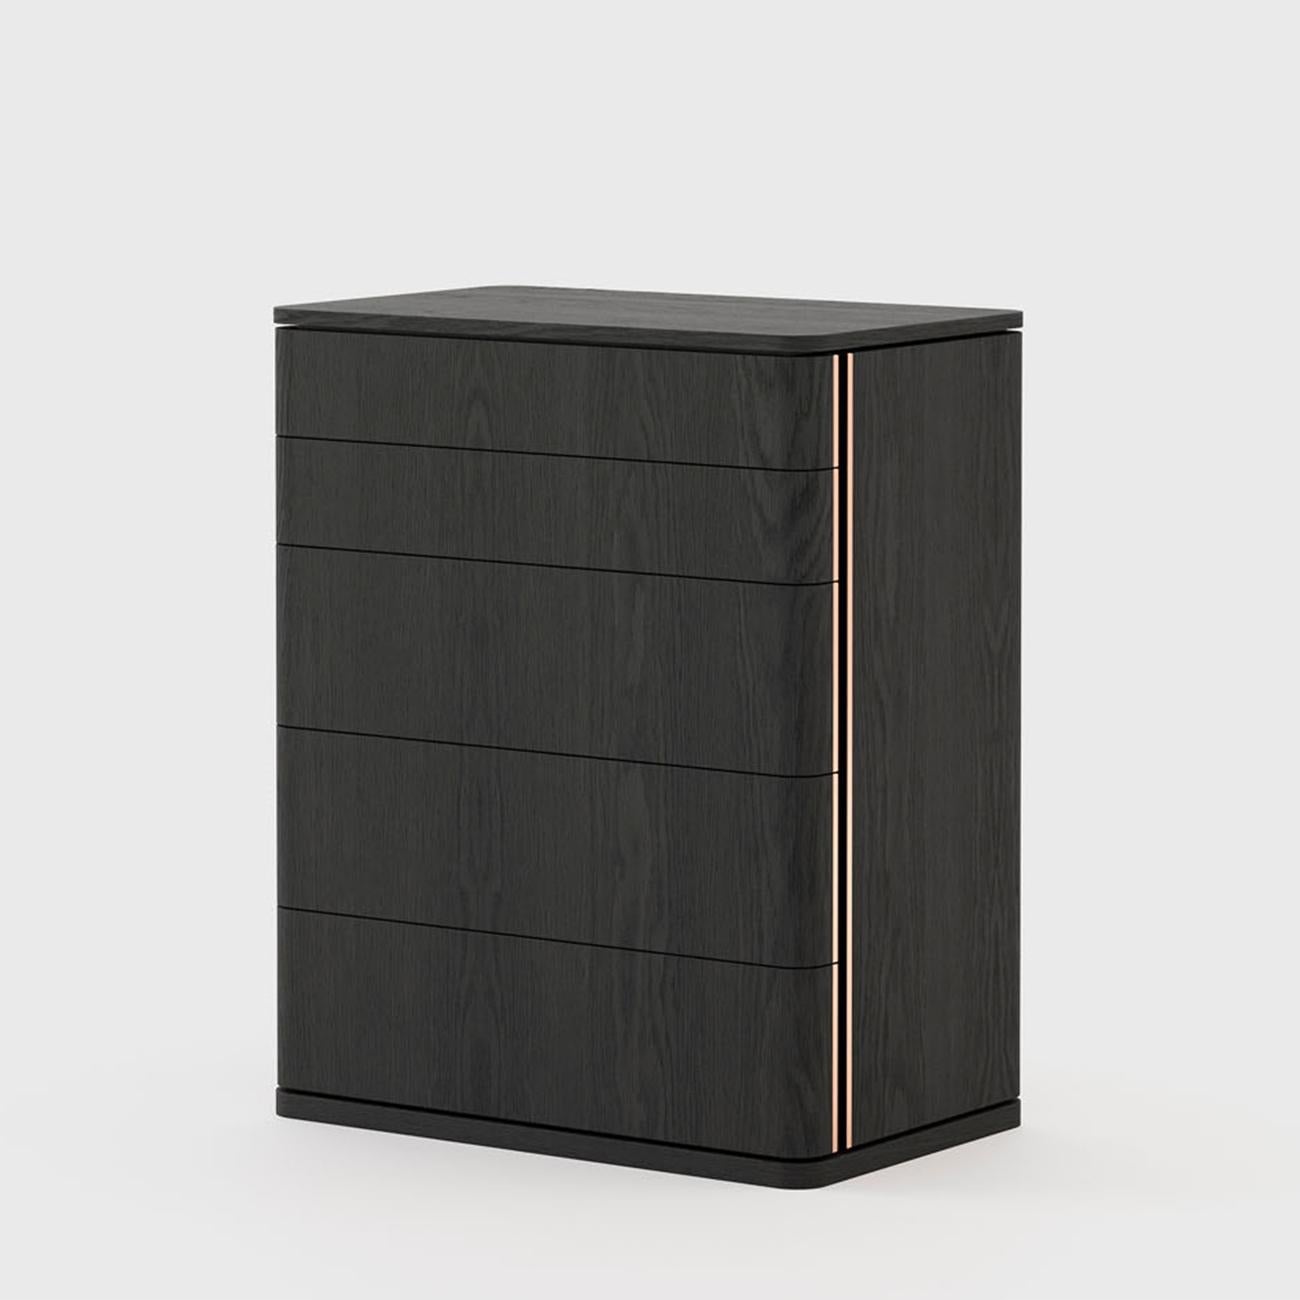 Chest of drawers Aroa with solid wood structure, in black
ash finish. With 5 drawers on easy glide metal runners with
polished stainless steel edging trim in copper finish or in brass
finish or in chrome finish with an edging trim reminder the